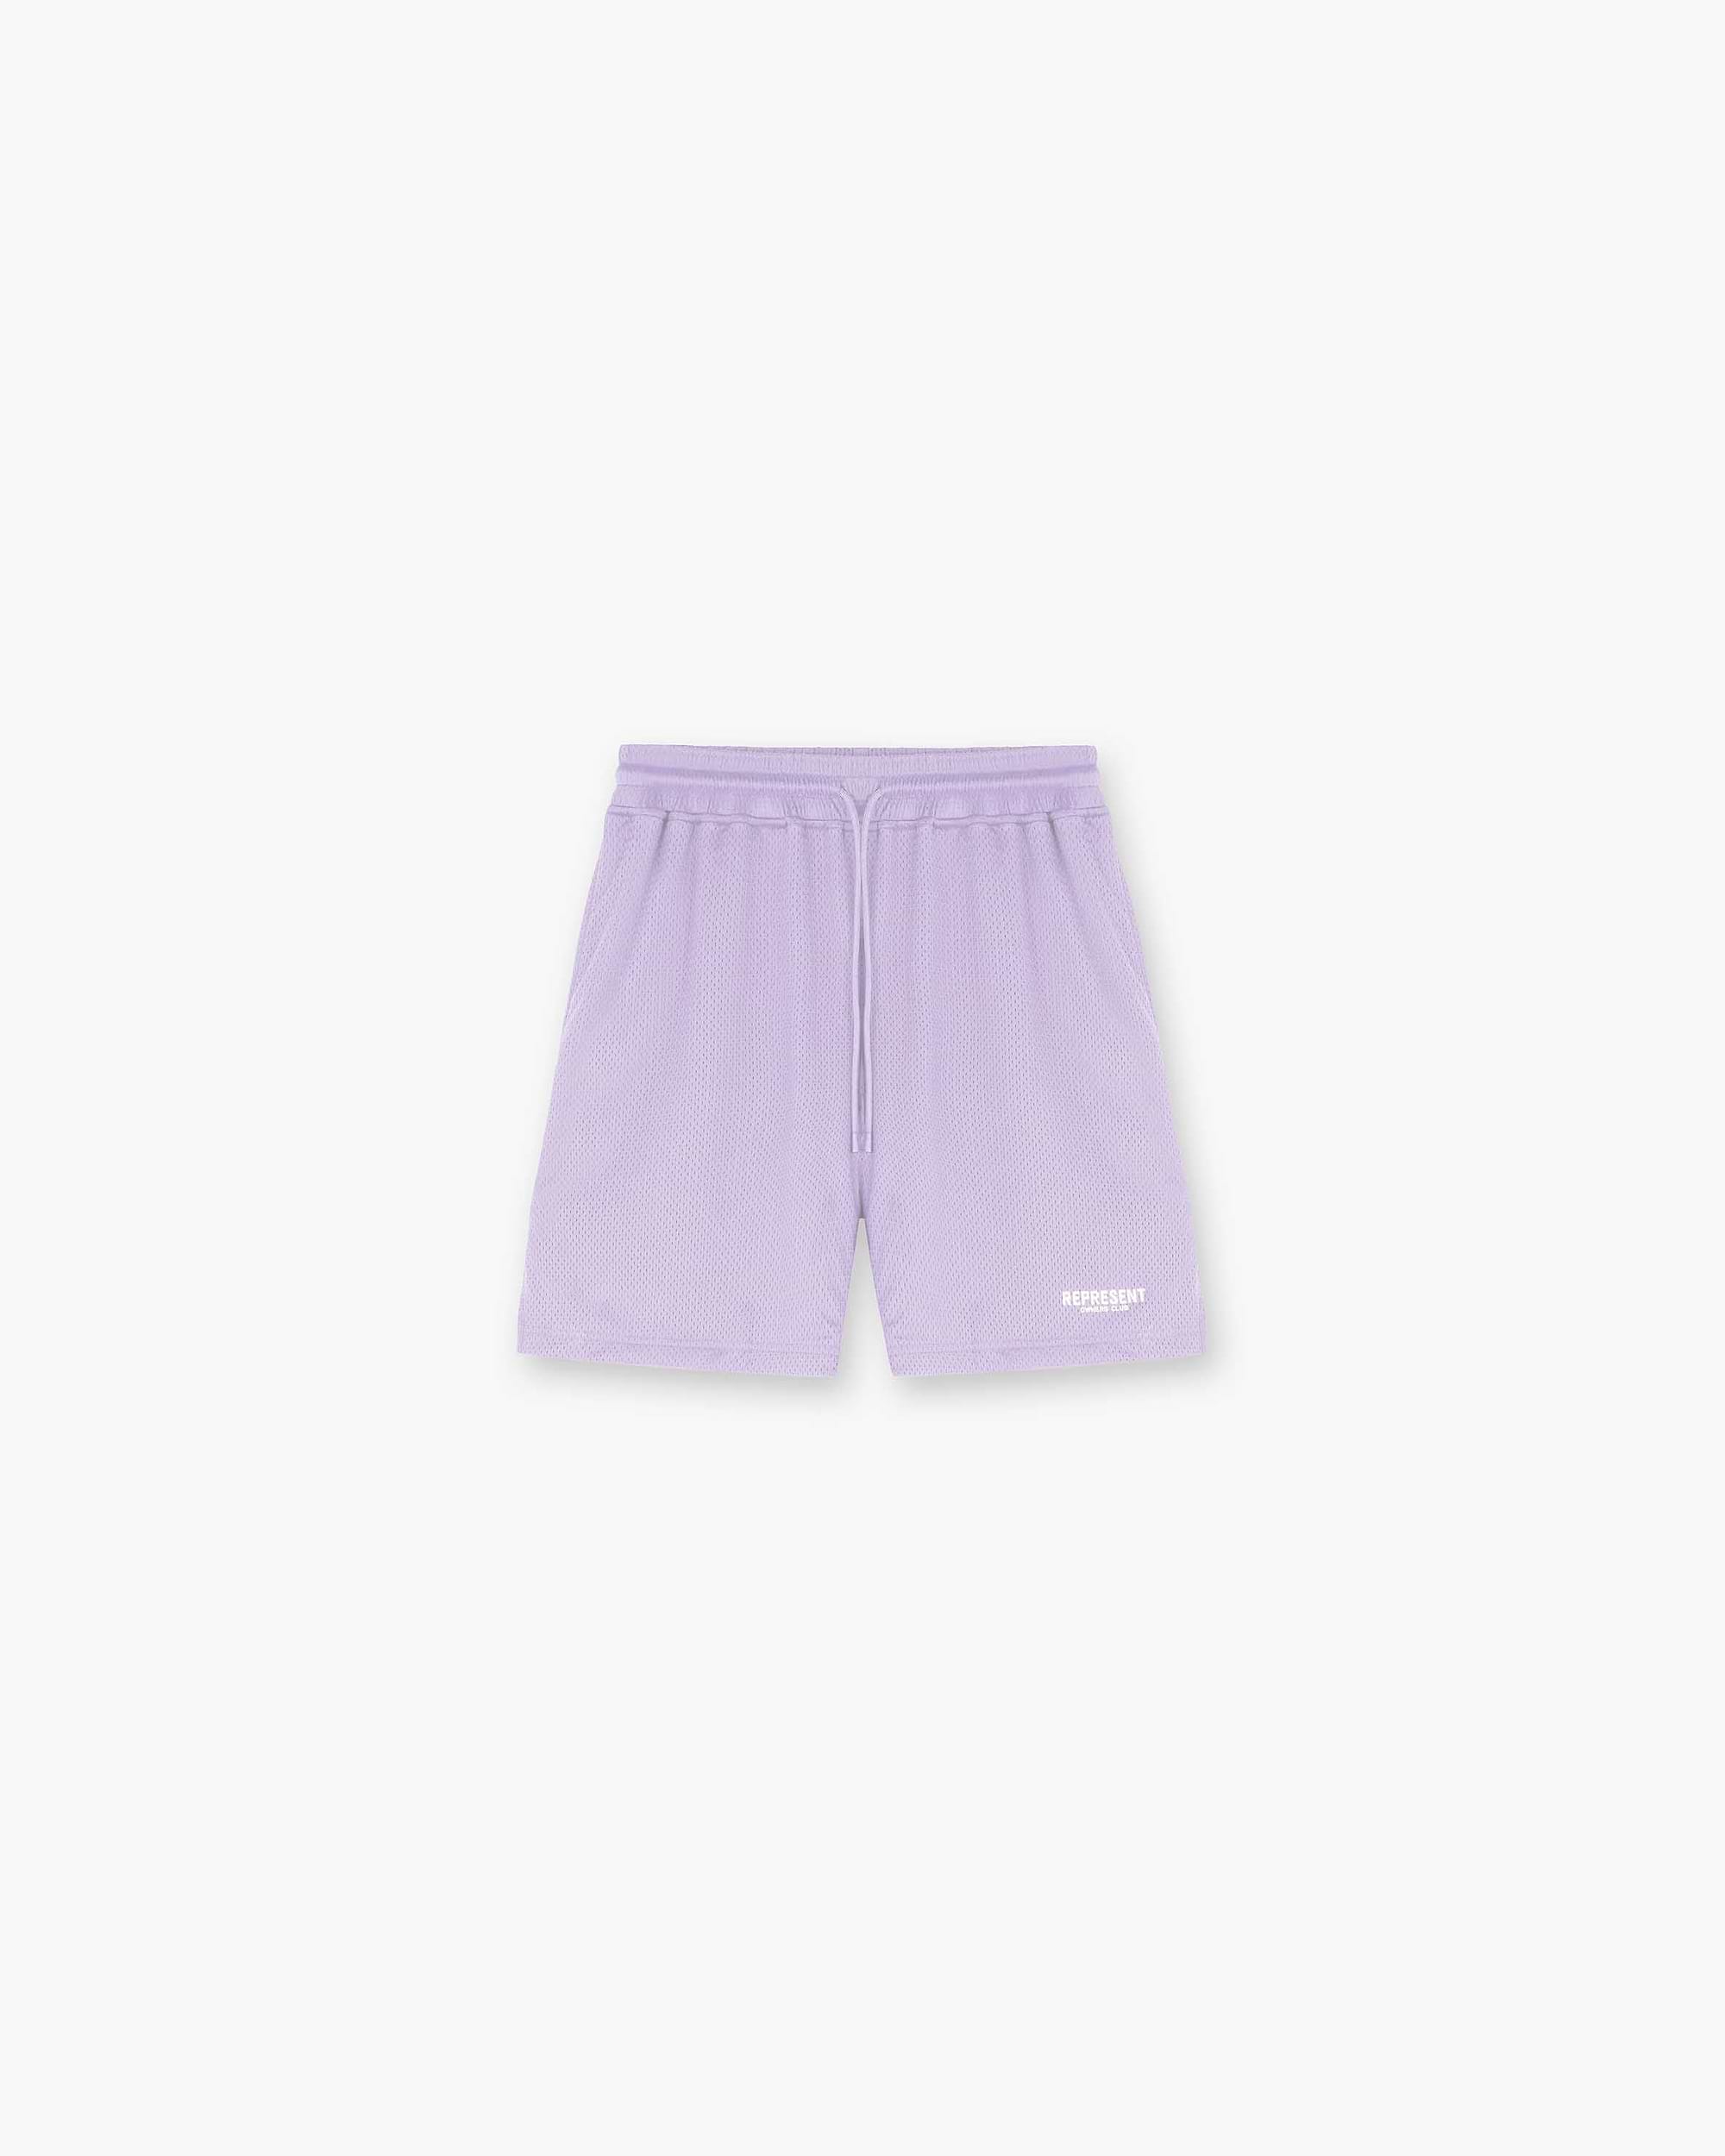 Represent Owners Club Mesh Shorts | Lilac Shorts Owners Club | Represent Clo